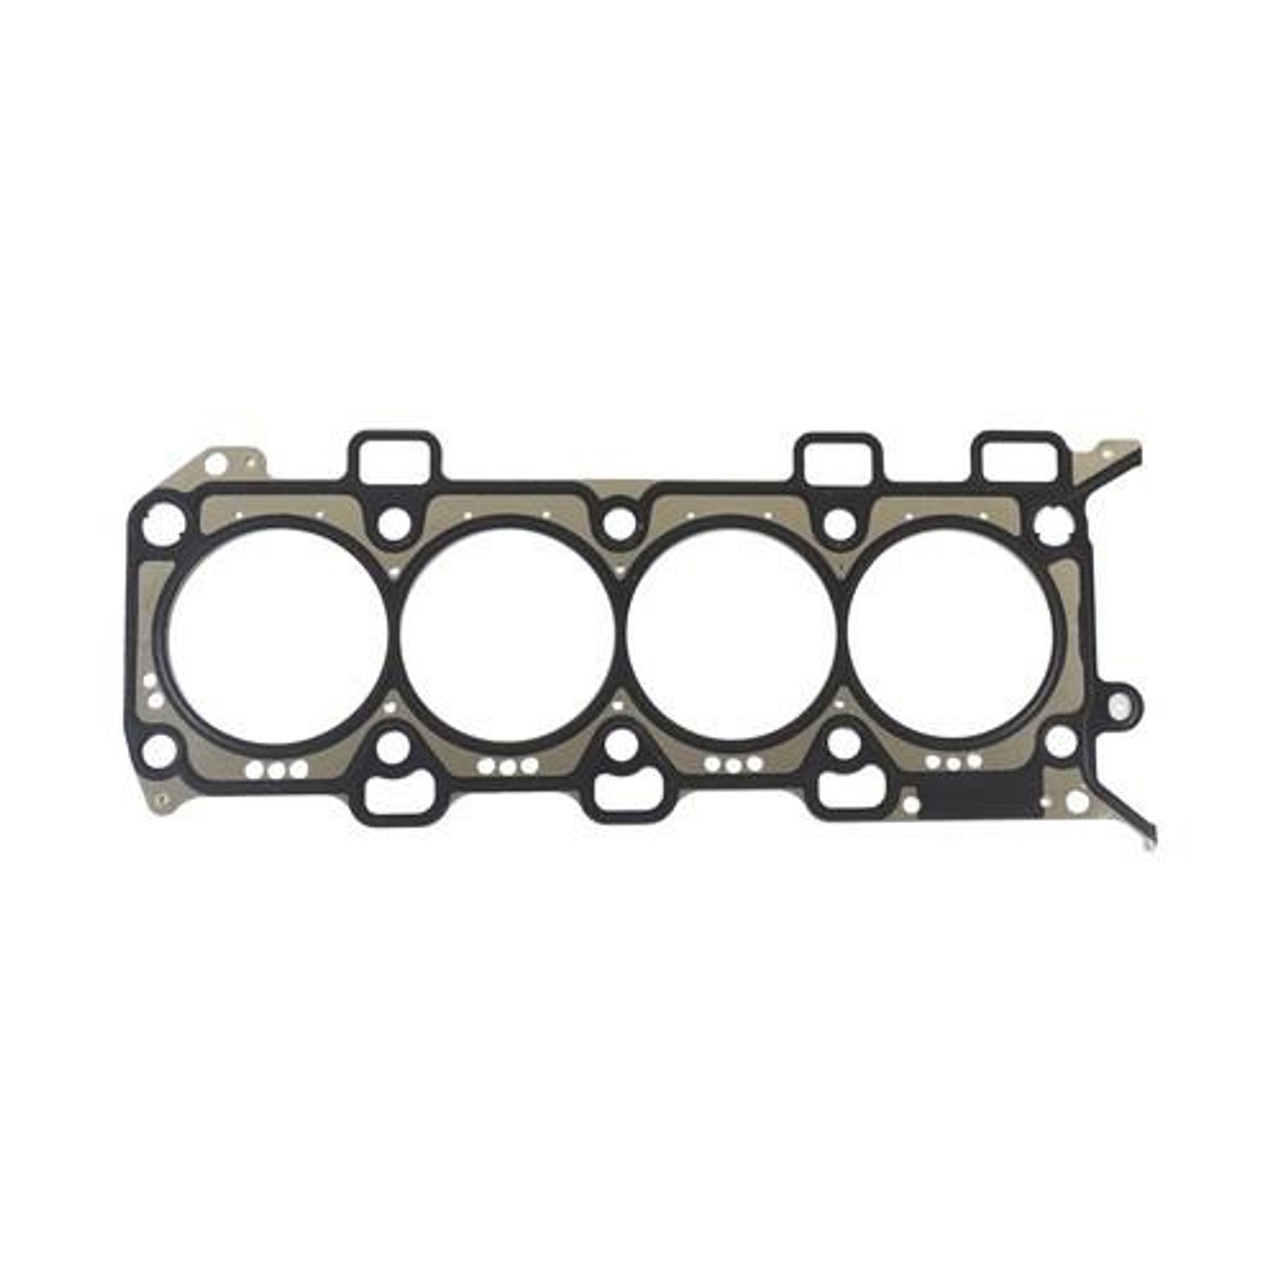 Right Head Gasket - 2014 Ford Mustang 5.0L Engine Parts # HG4299RZE8